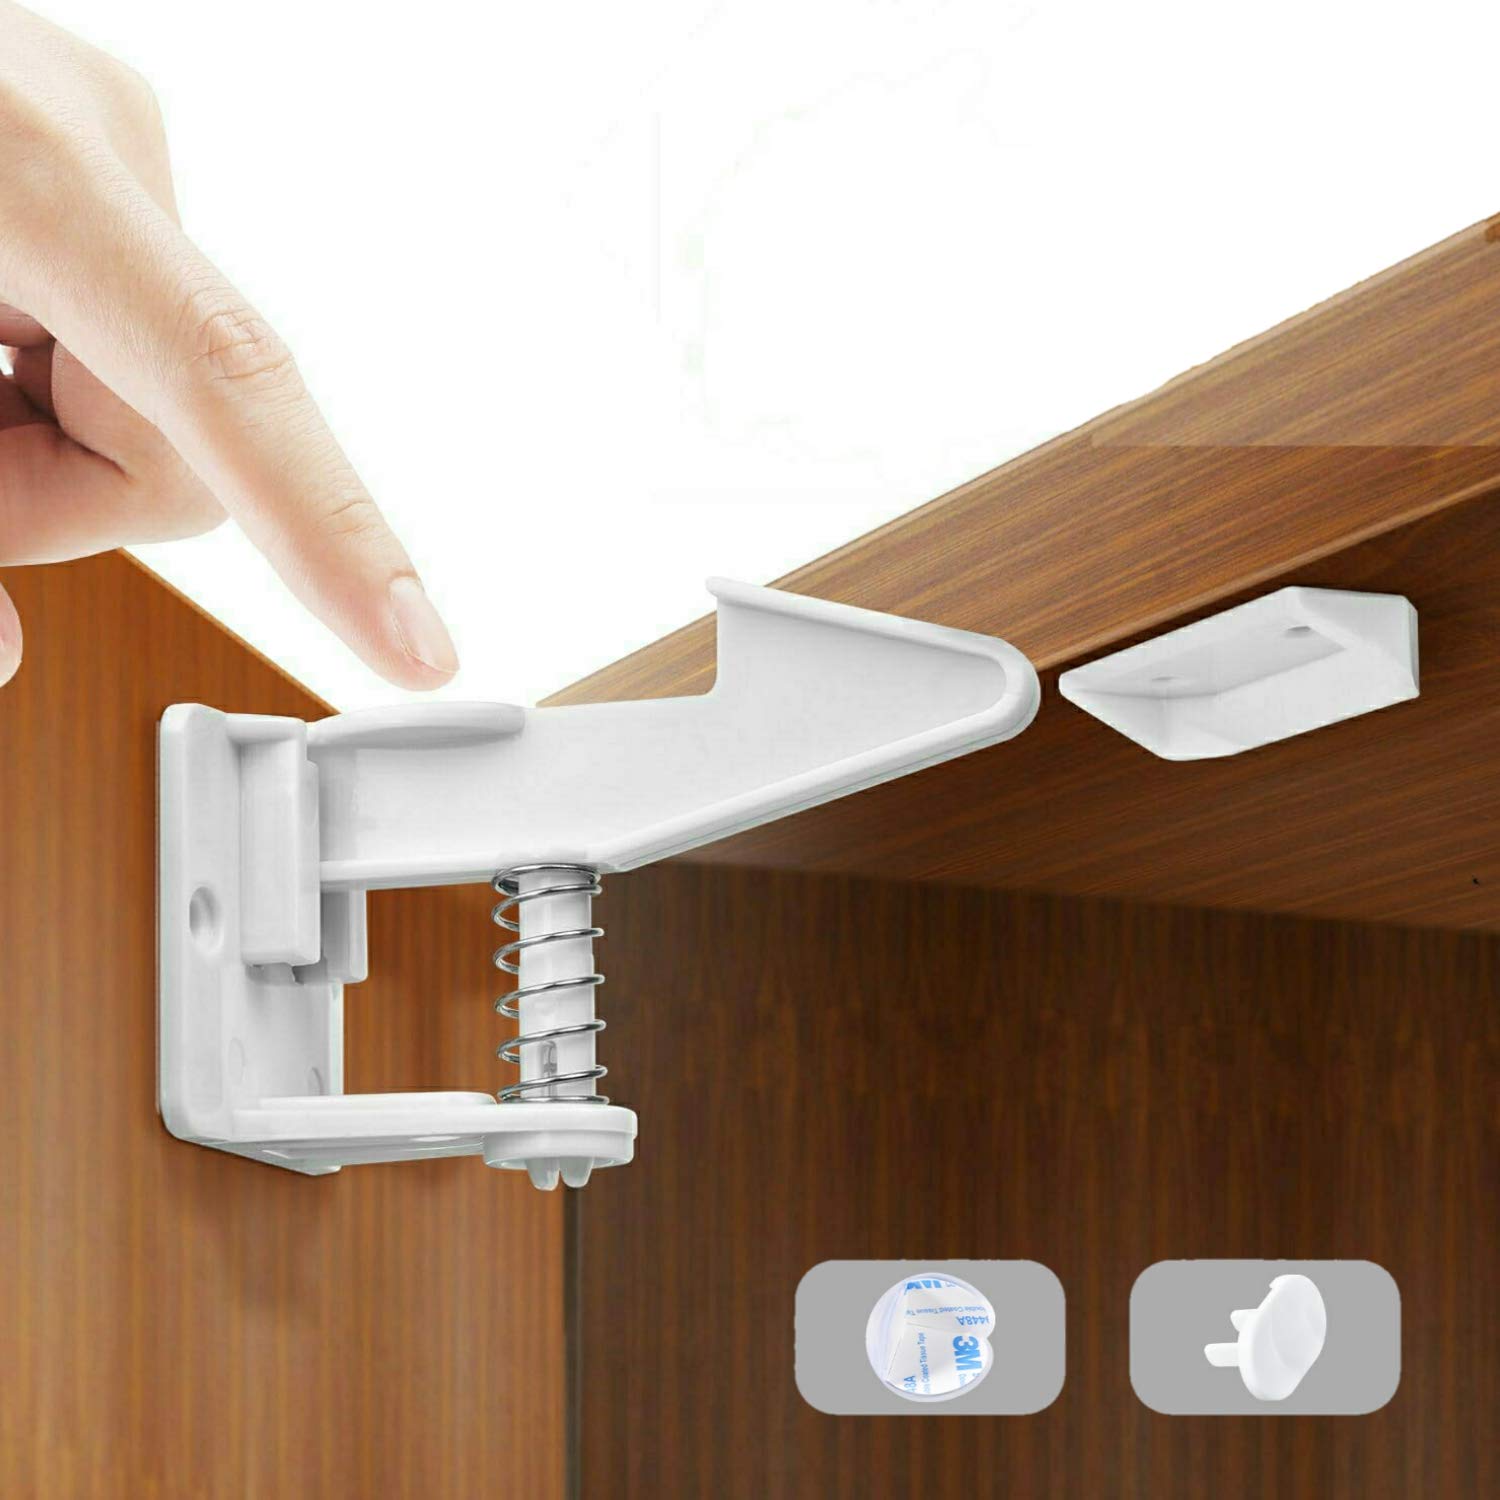 Cabinet and Drawer Locks for Babyproofing your home